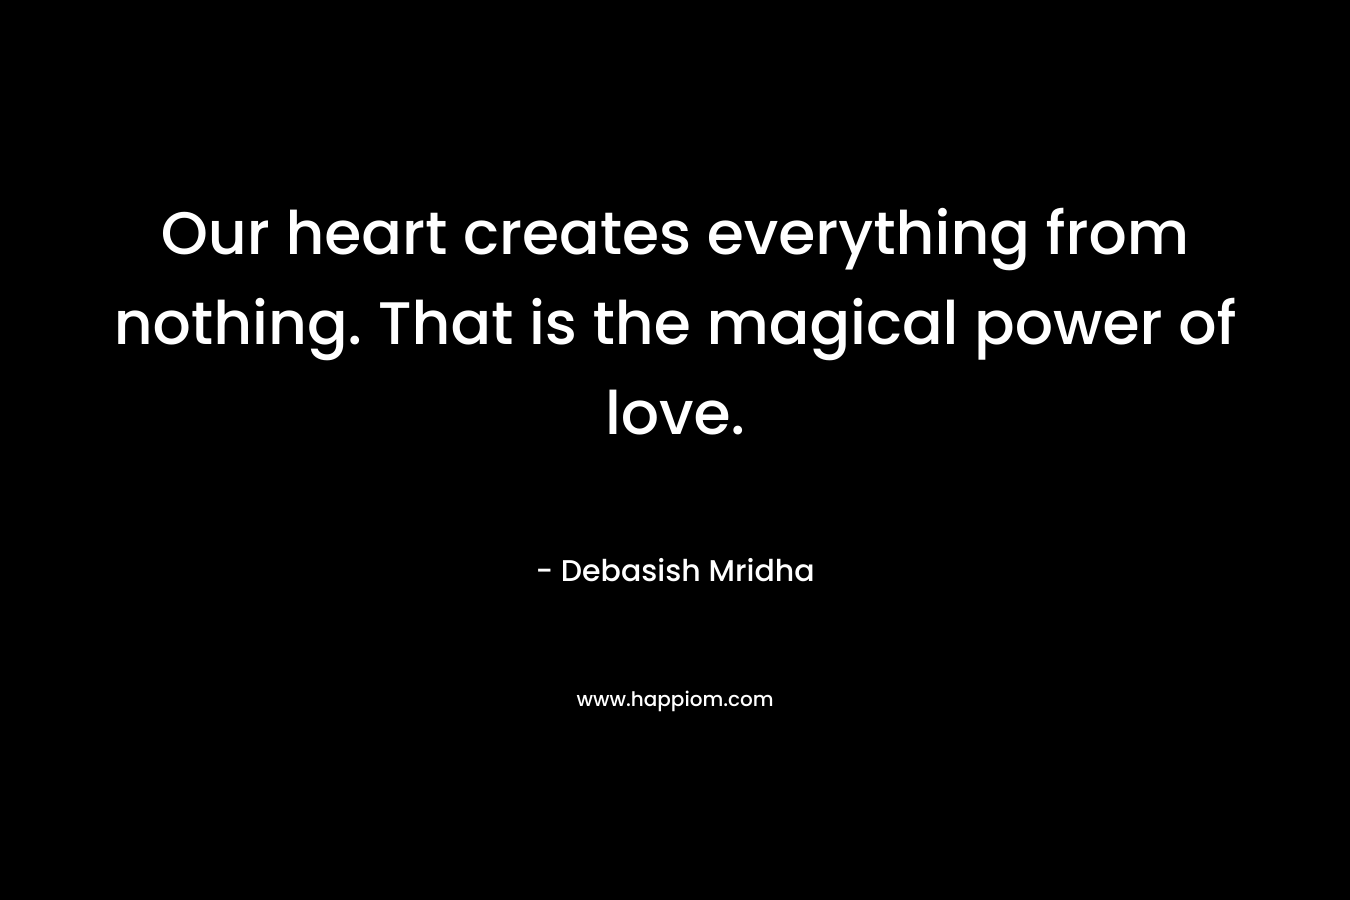 Our heart creates everything from nothing. That is the magical power of love.